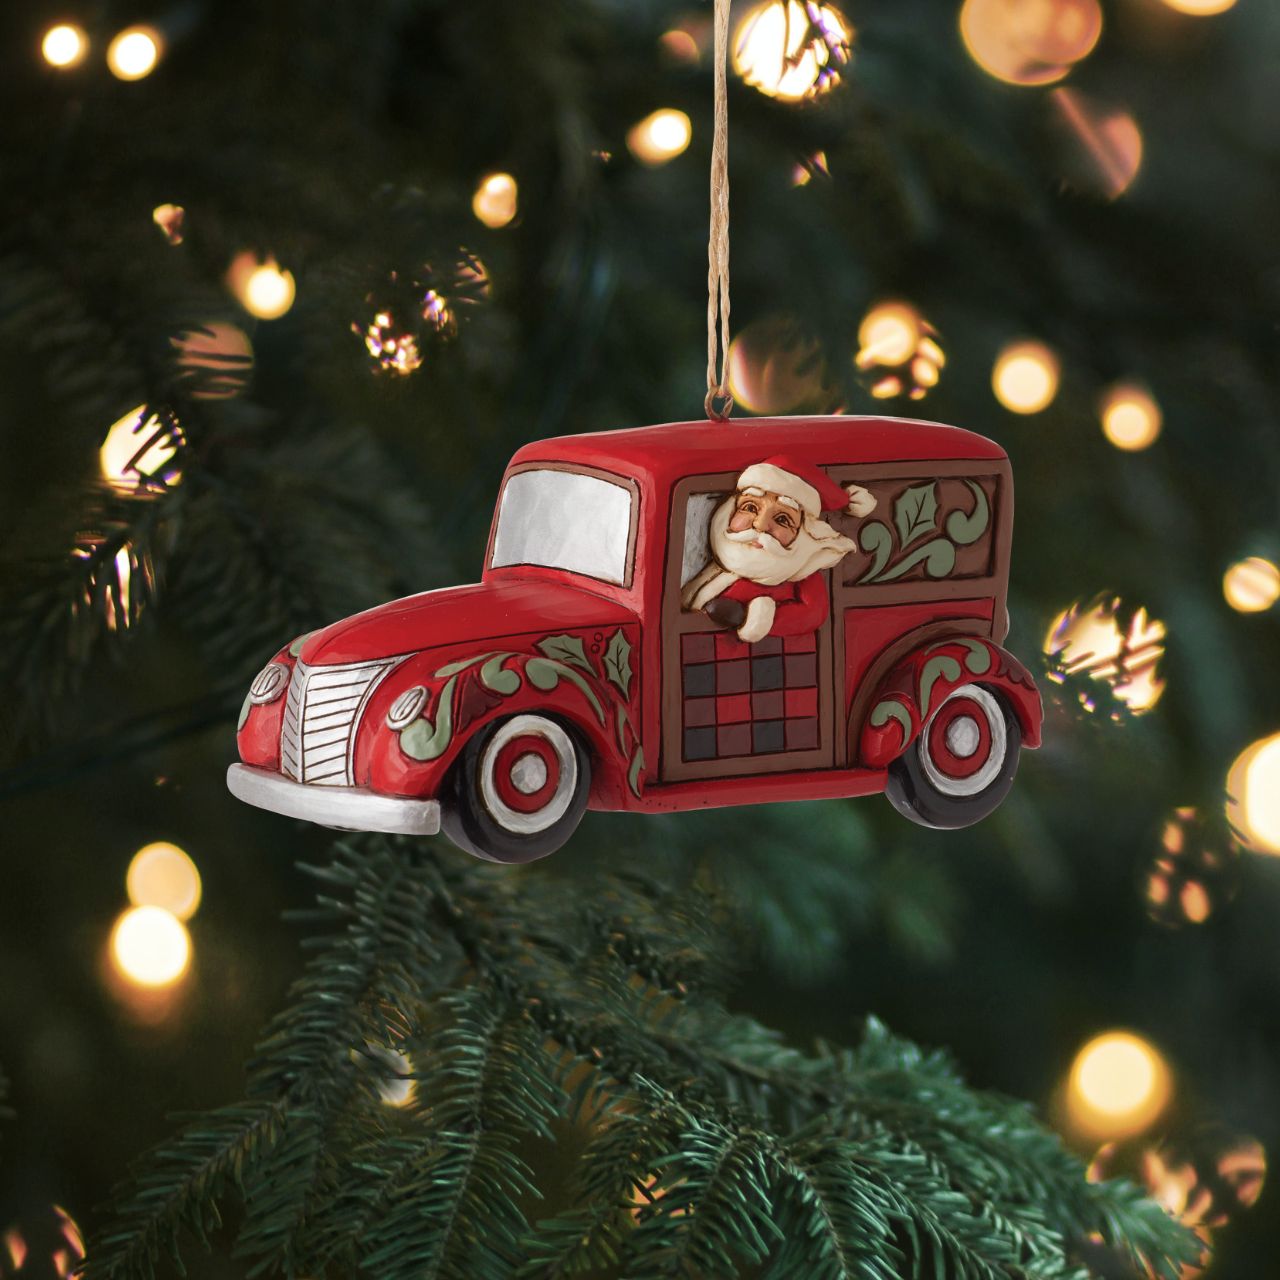 Heartwood Creek Highland Glen Santa with Wagon Hanging Ornament  Designed by award winning artist Jim Shore as part of the Heartwood Creek Highland Glen Collection, hand crafted using high quality cast stone and hand painted, this festive wagoneer hanging ornament is perfect for the Christmas season.